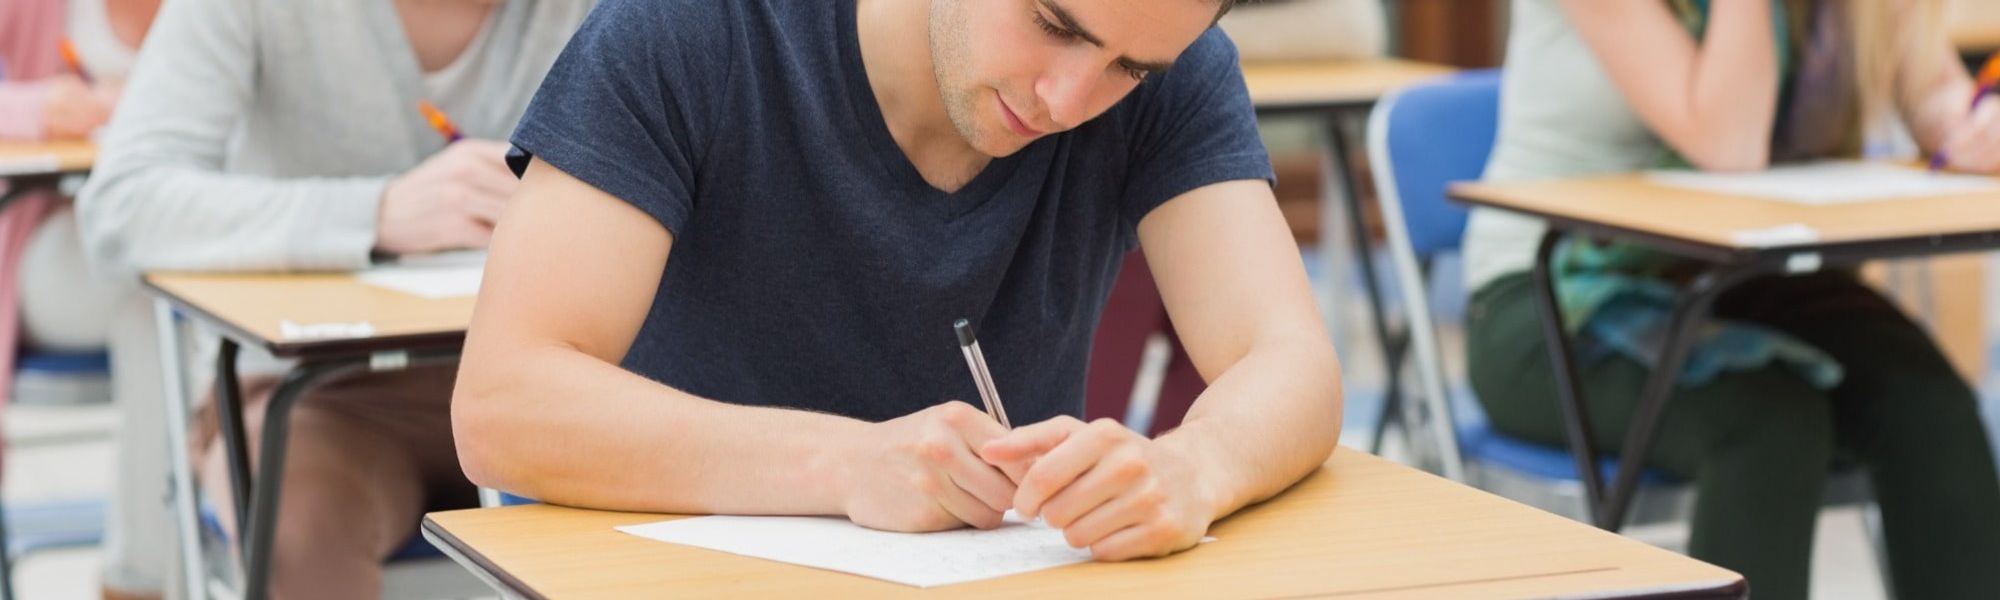 college student or graduate completing assessment paper as part of job application